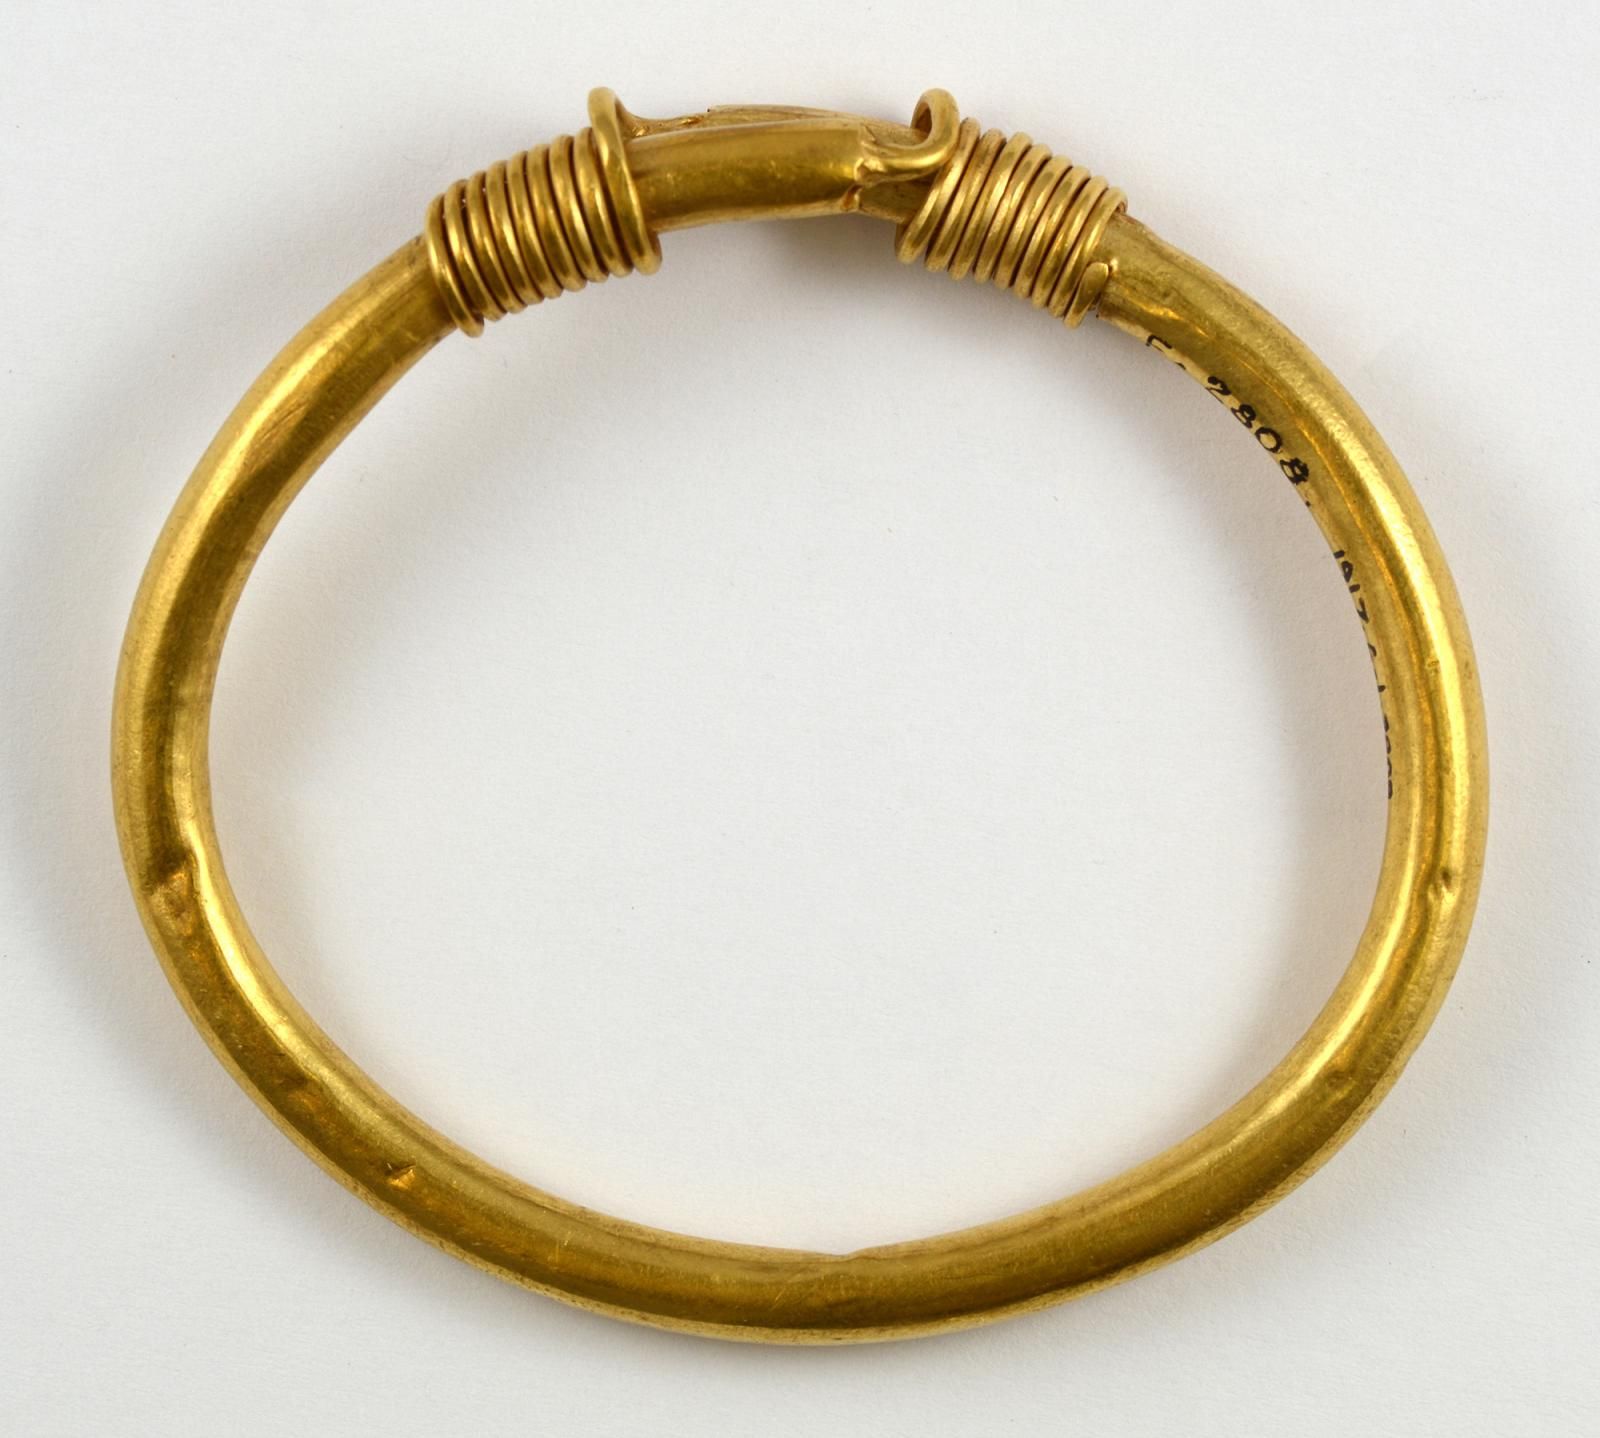 Roman bracelet, dated to the 2nd-3rd century AD, similar to missing items.